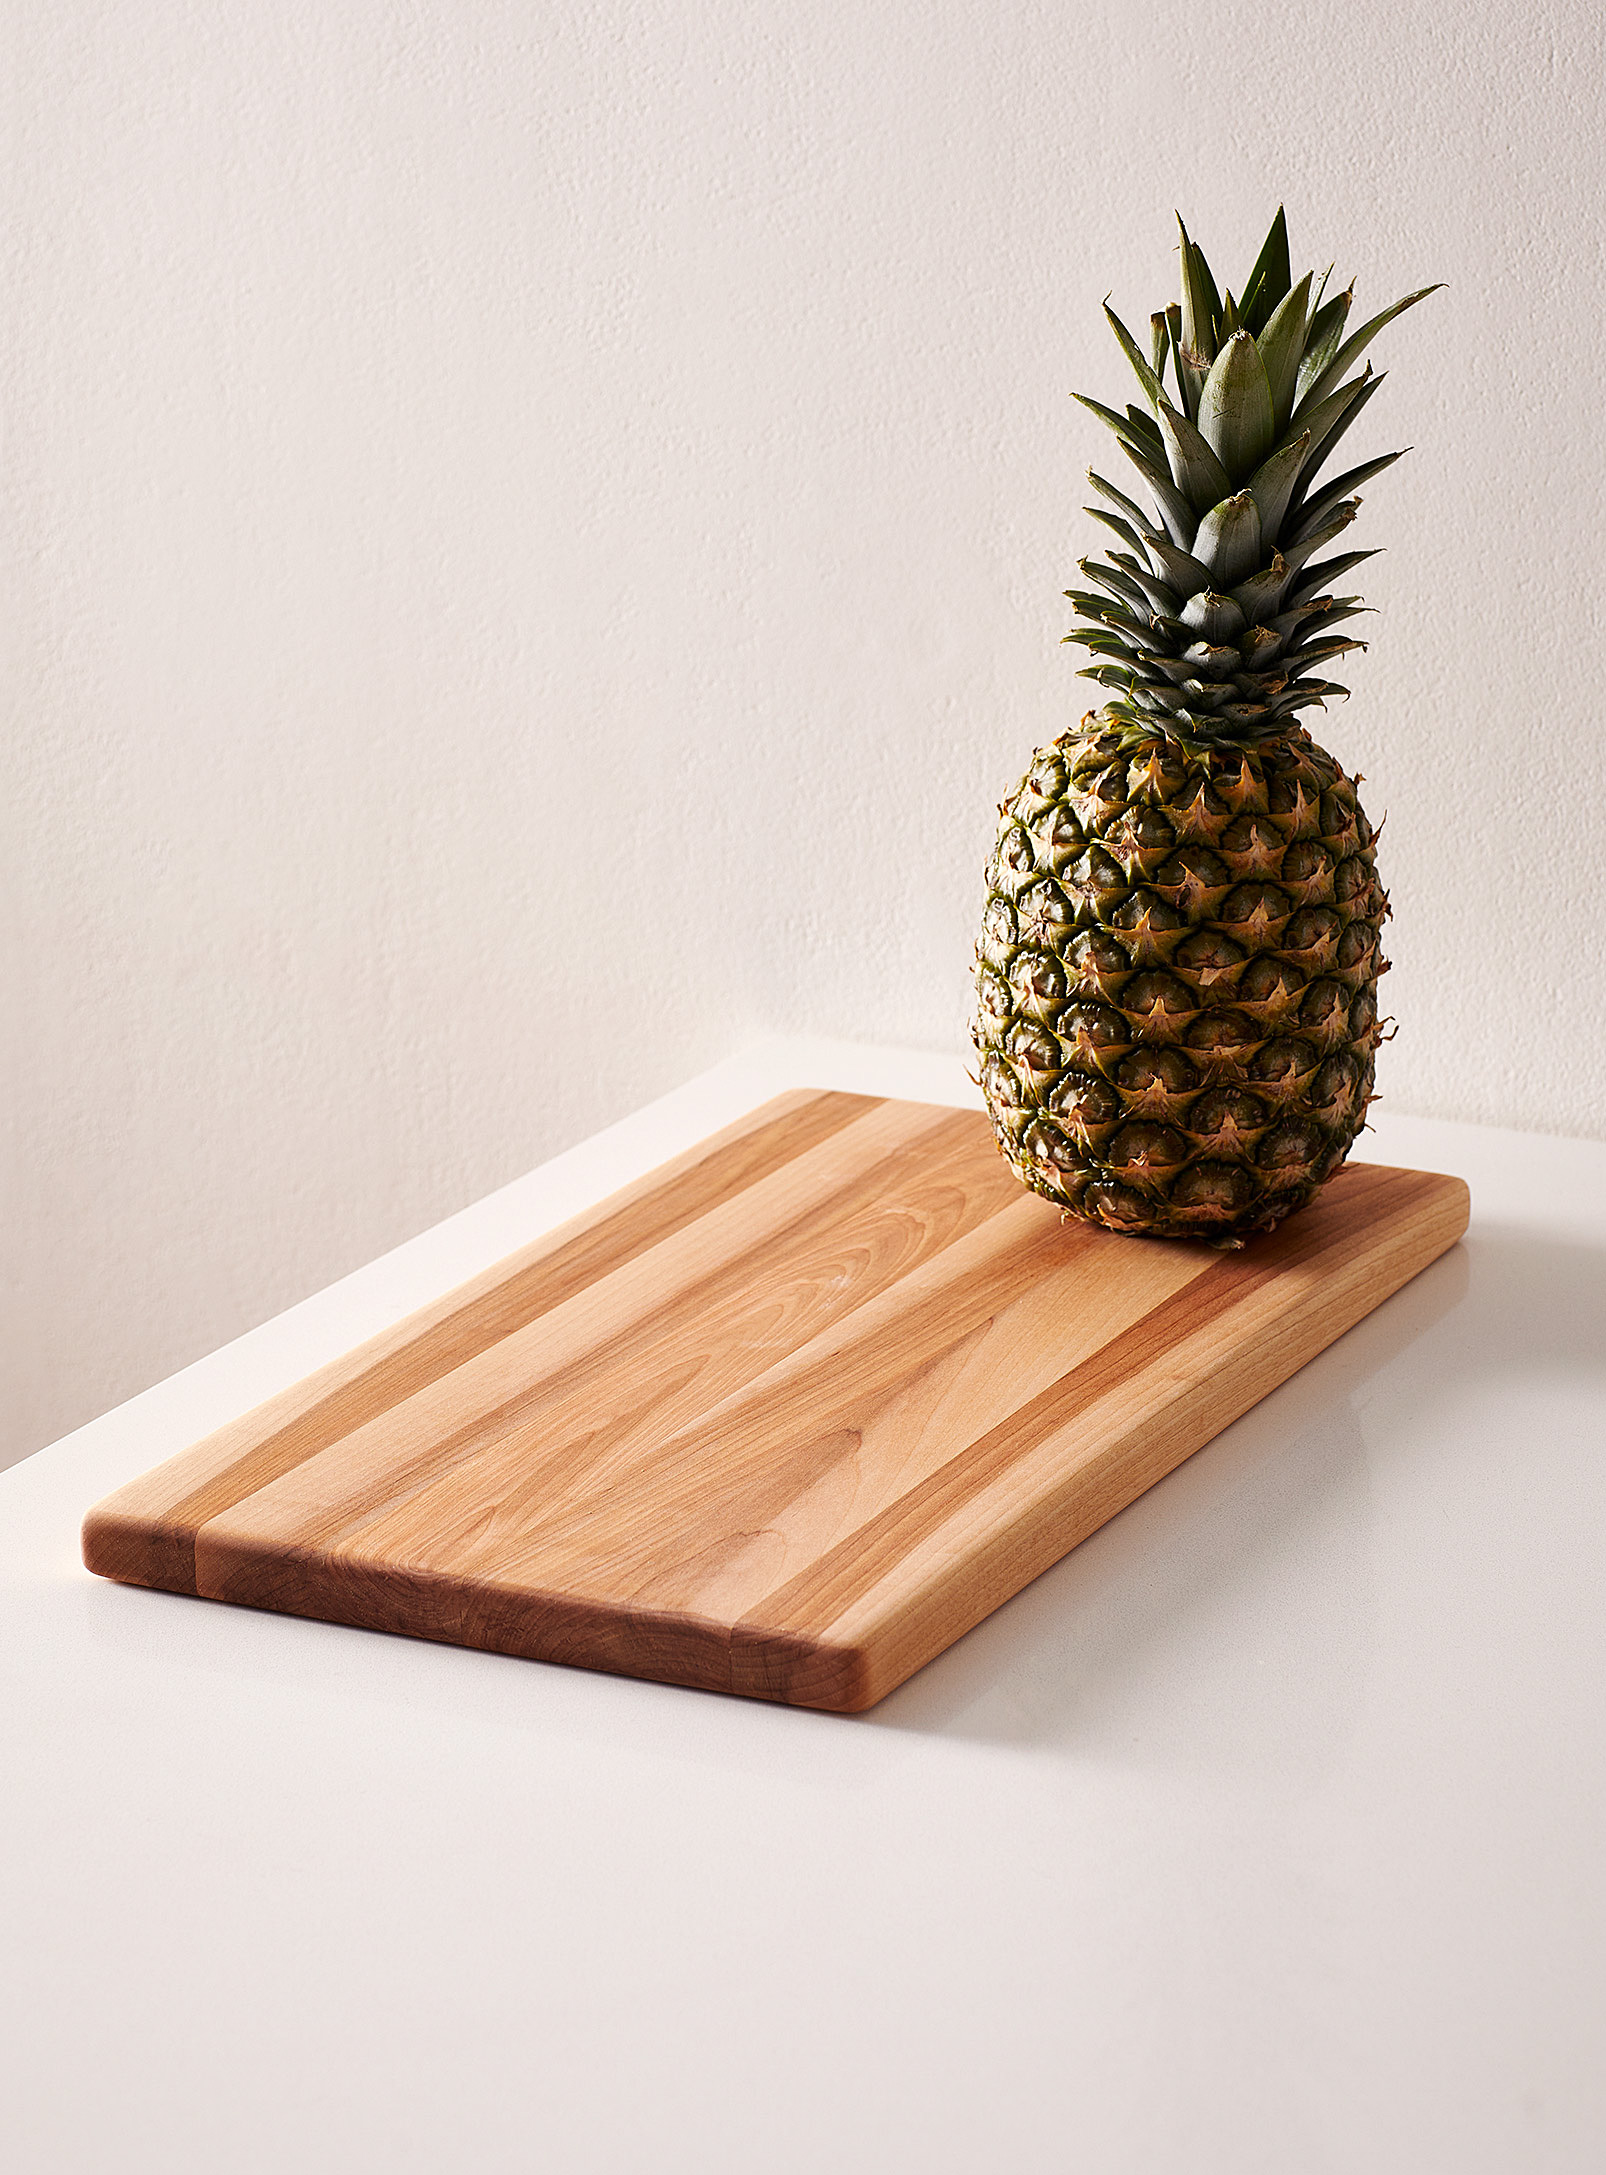 Livcan Design Large Cutting Board In Assorted